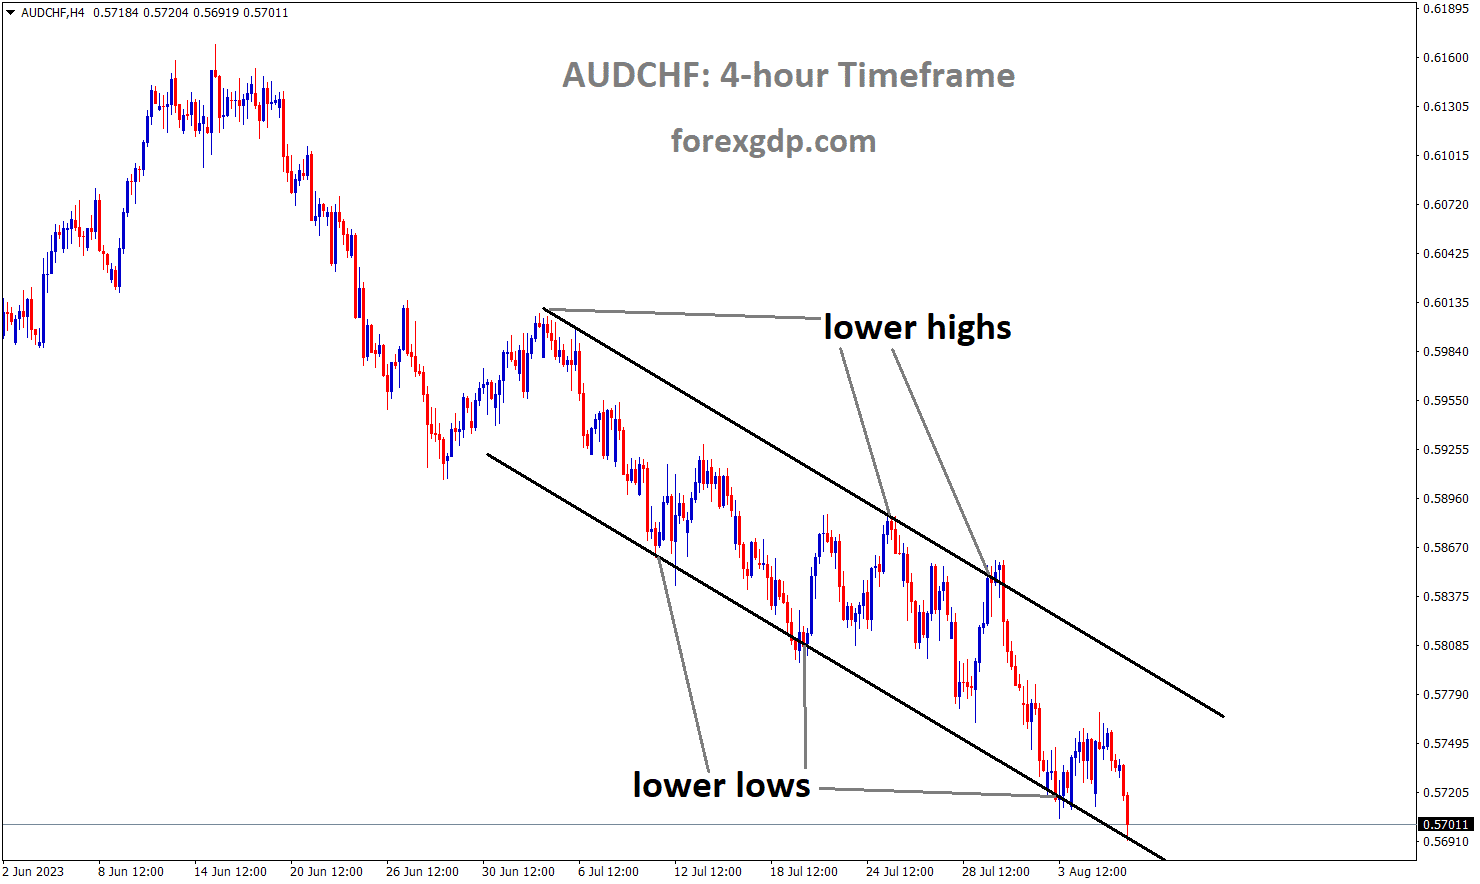 AUDCHF is moving in the Descending channel and the market has reached the lower low area of the channel